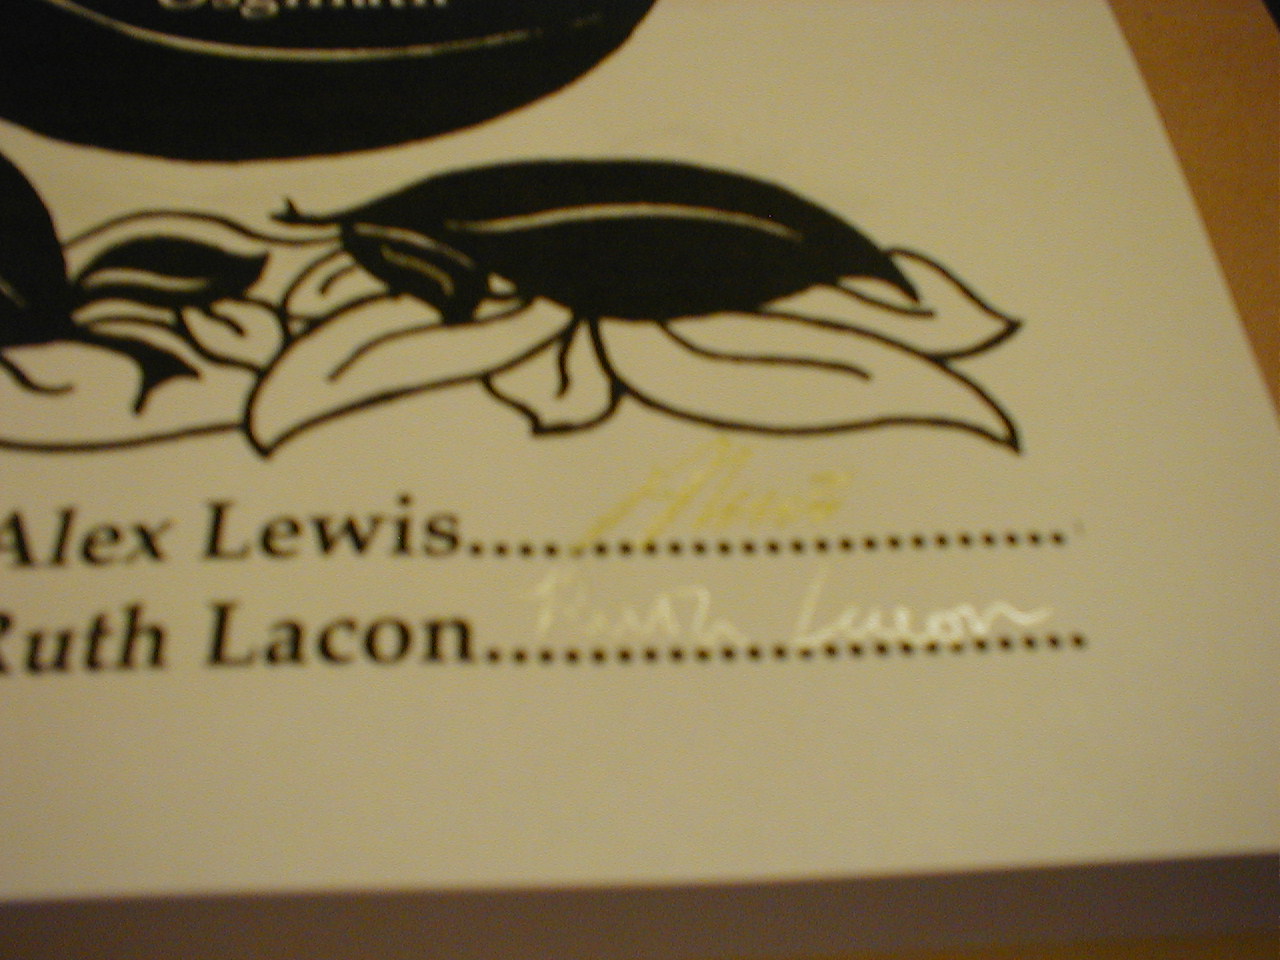 Alex lewis and Ruth Lacon signed